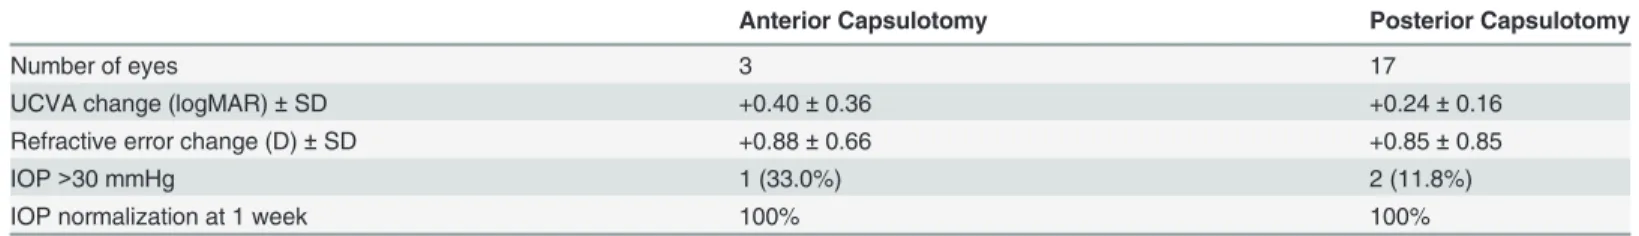 Table 2. Results of anterior or posterior capsulotomy for the late postoperative capsular bag distension syndrome.